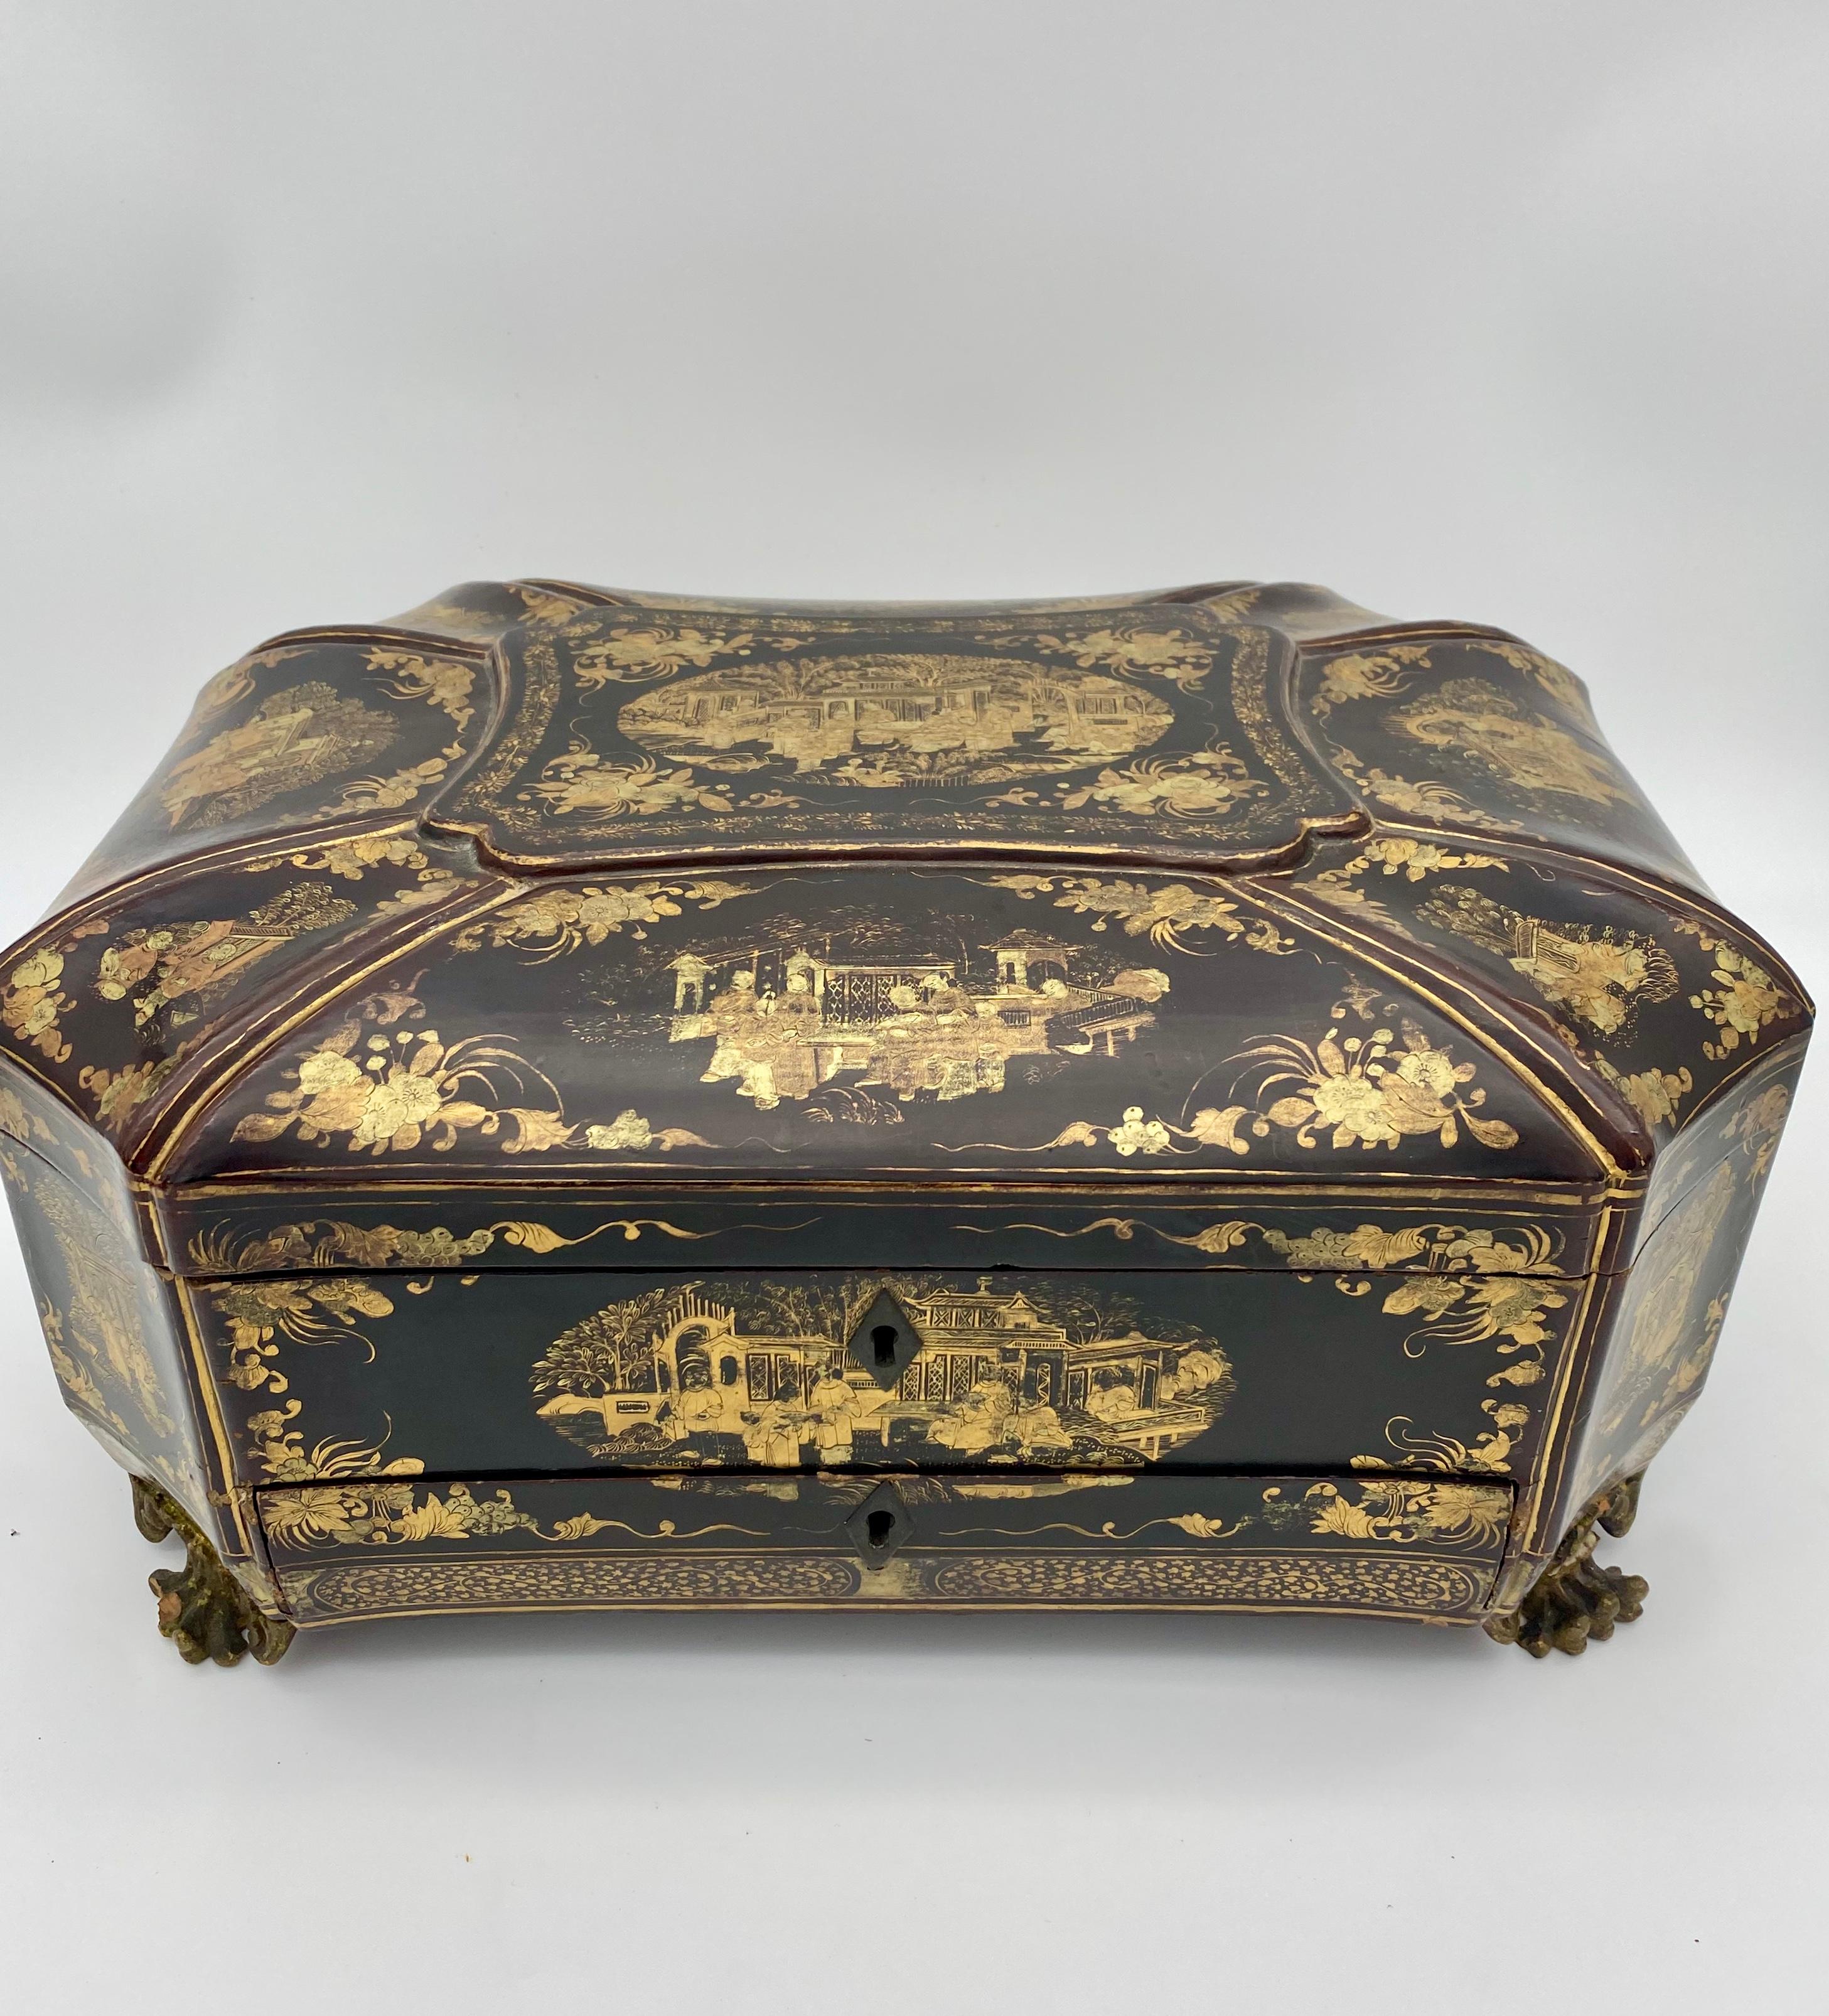 19th century Chinese lacquer sewing box from the Qing Dynasty. Decorated all over beautifully with intricate designs and images of ancient Chinese people and structures.